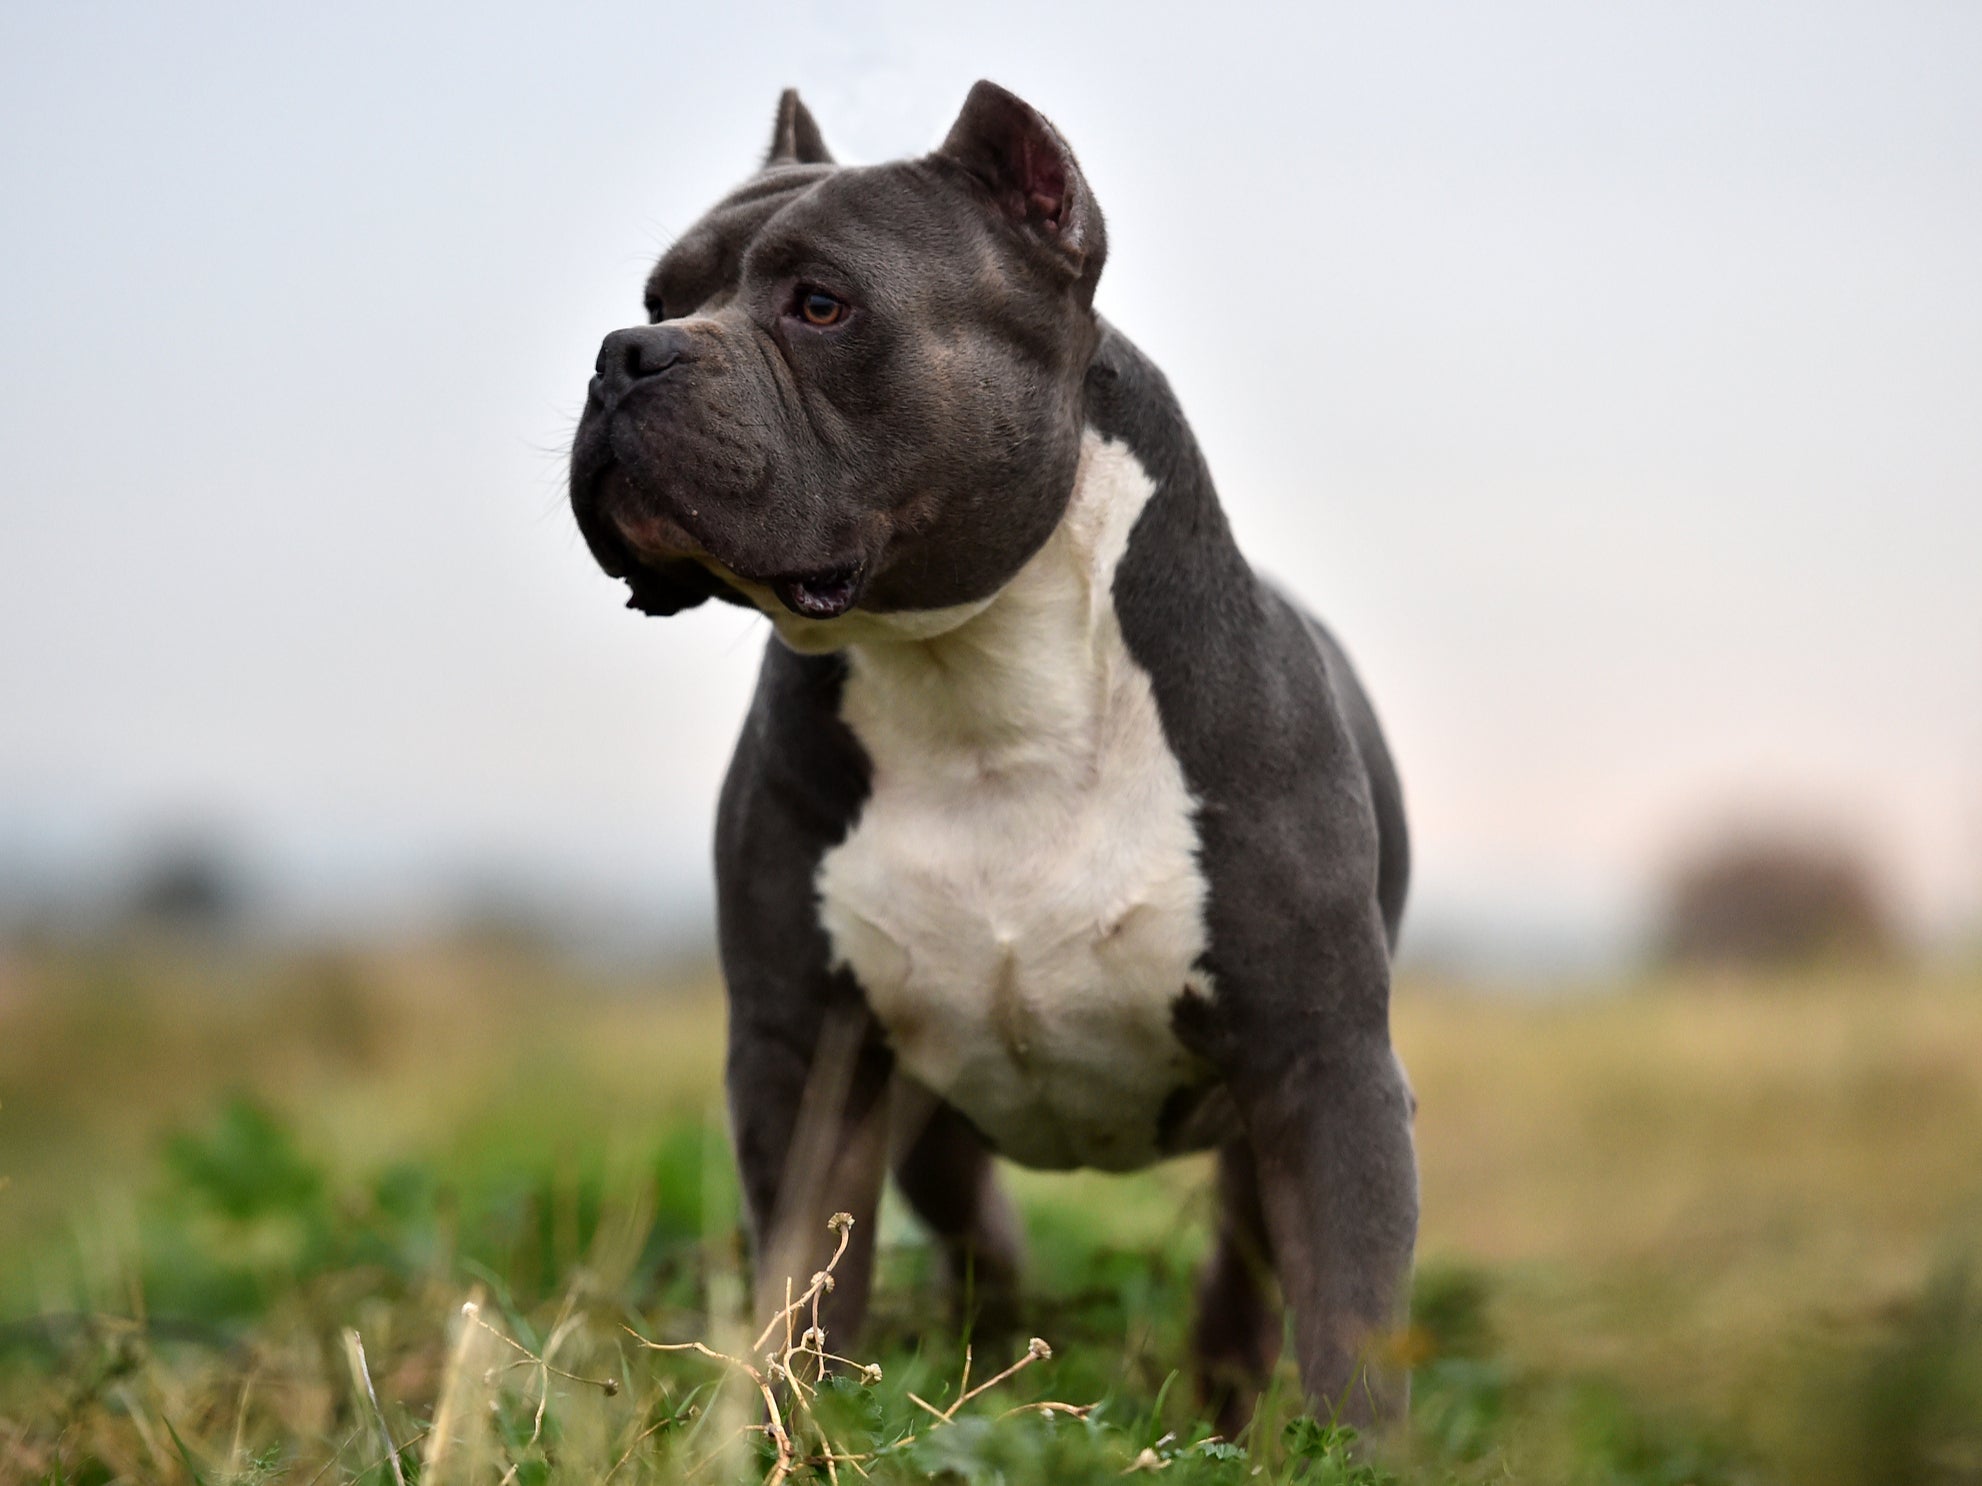 Home secretary calls for ban on XL bully dogs